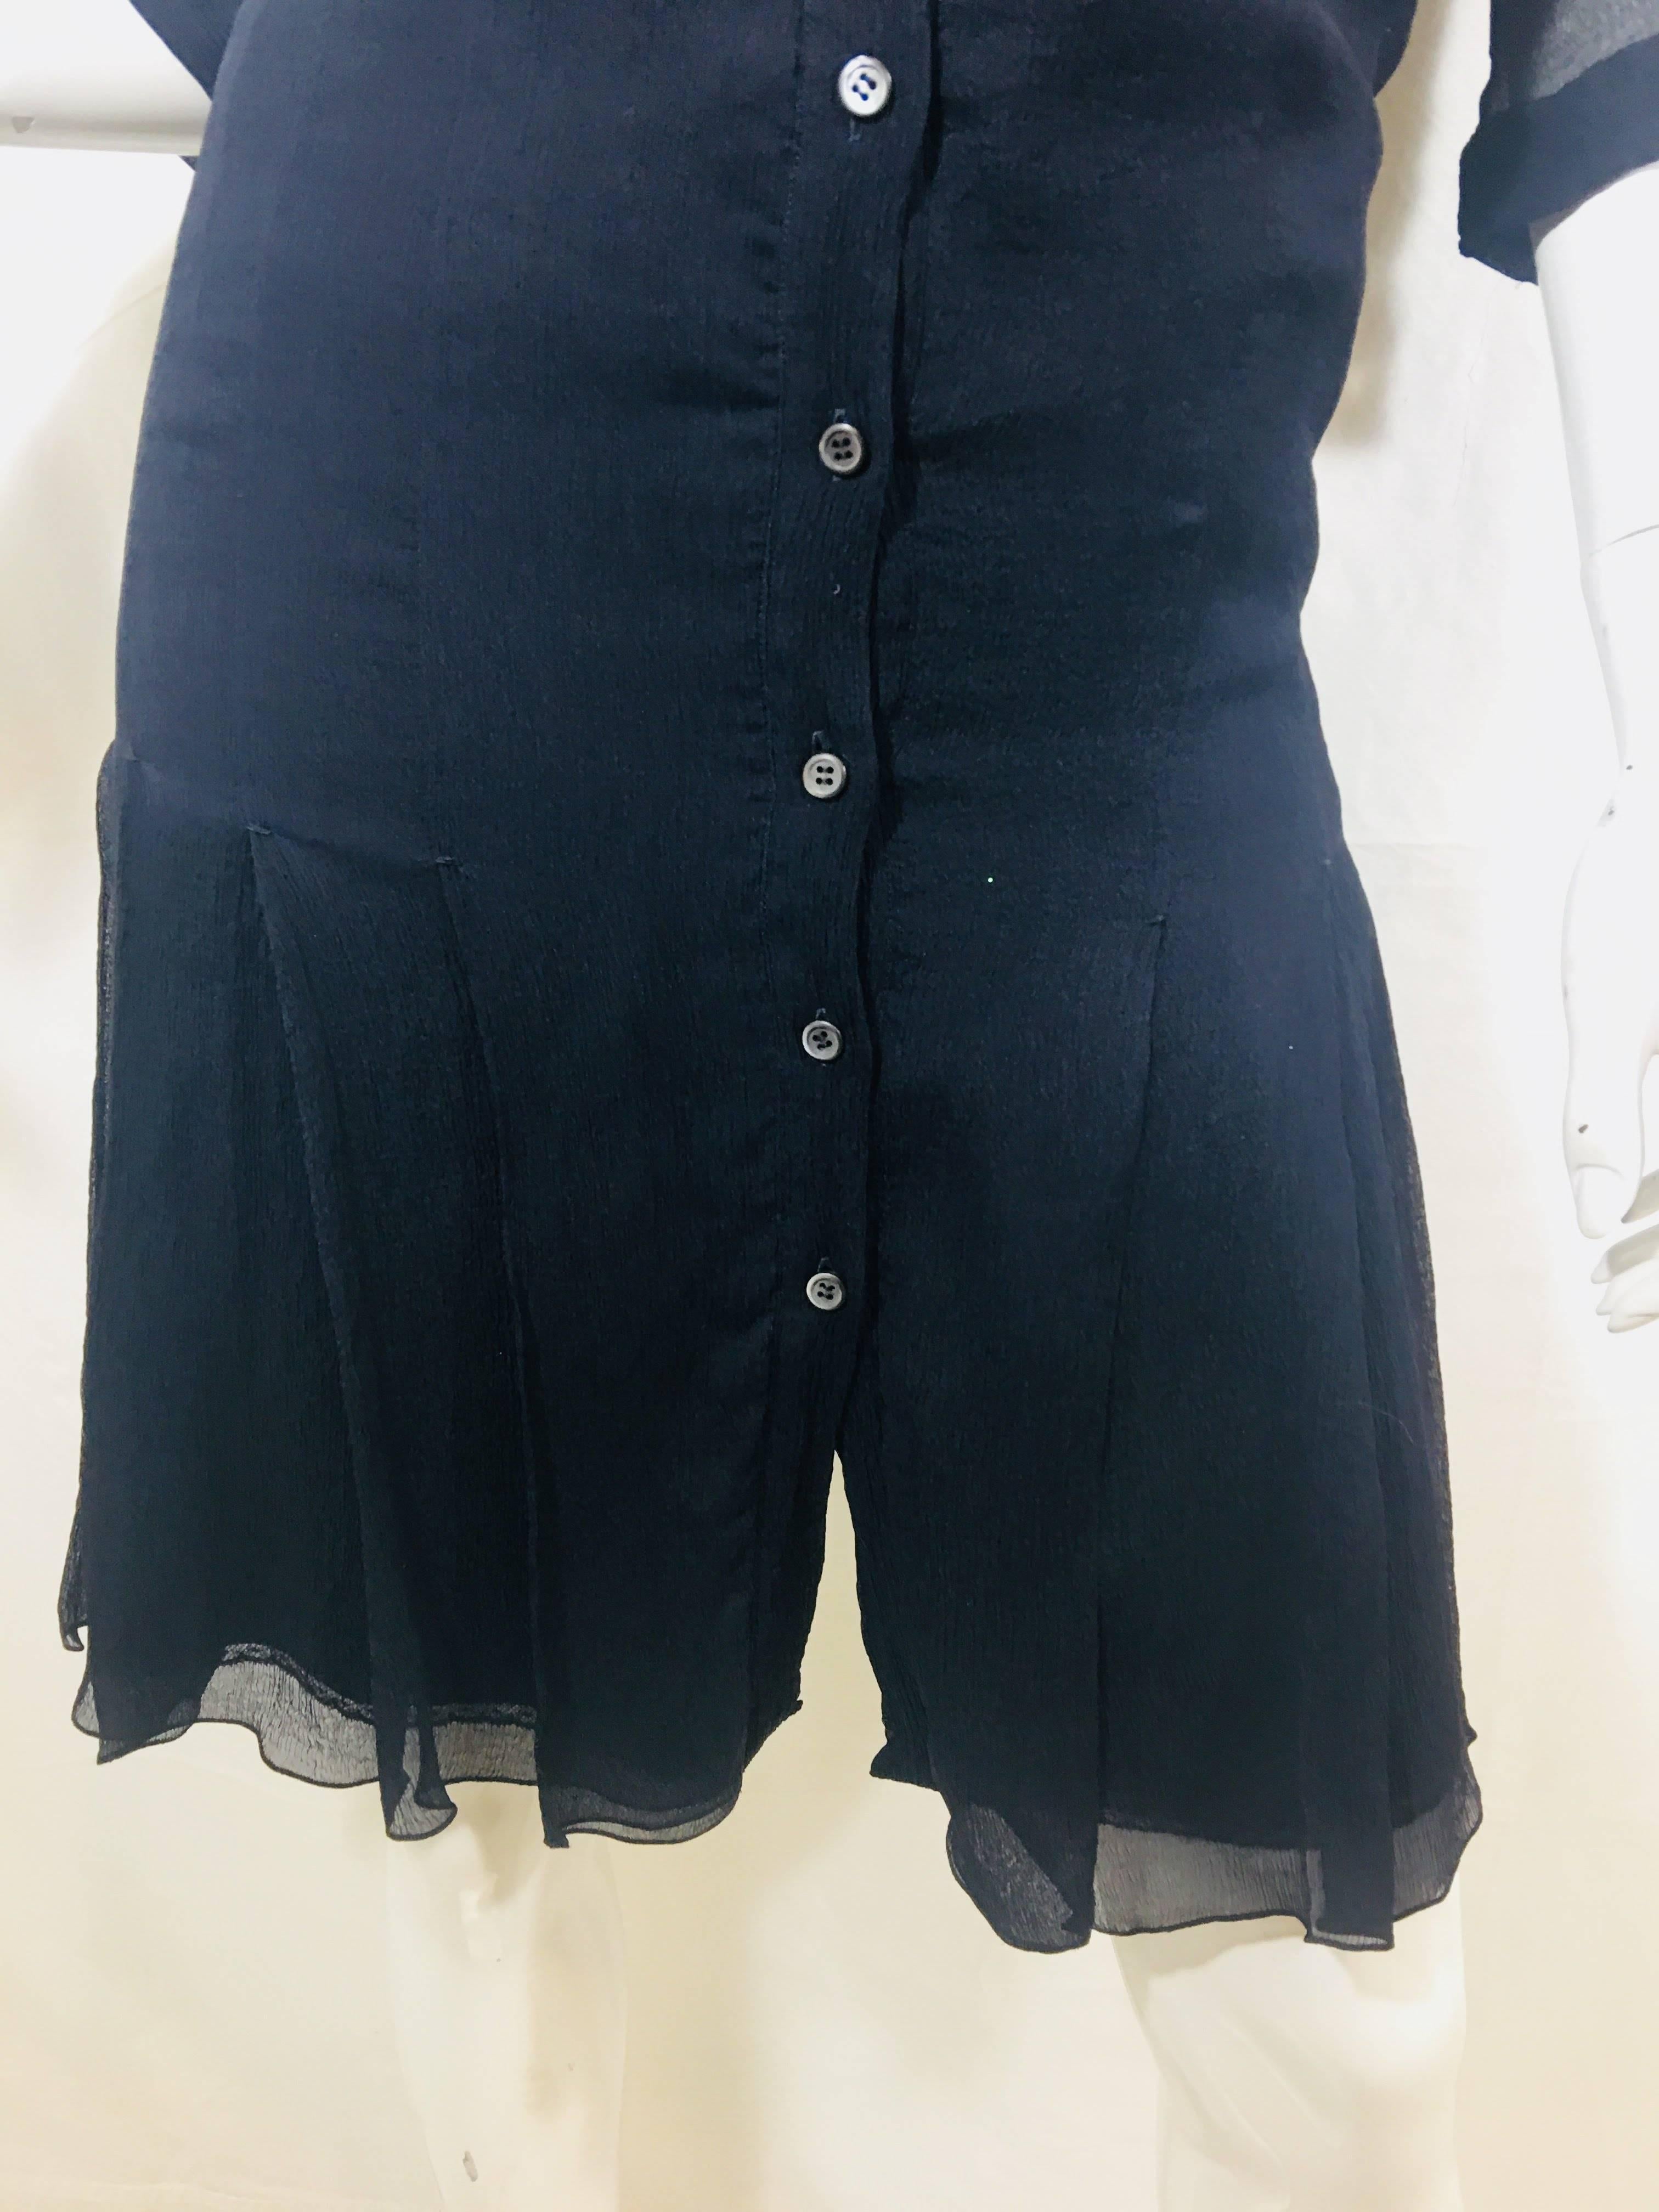 Prada Shift Dress with 3/4 Sleeves and Sewn in Slip and Button up Front.